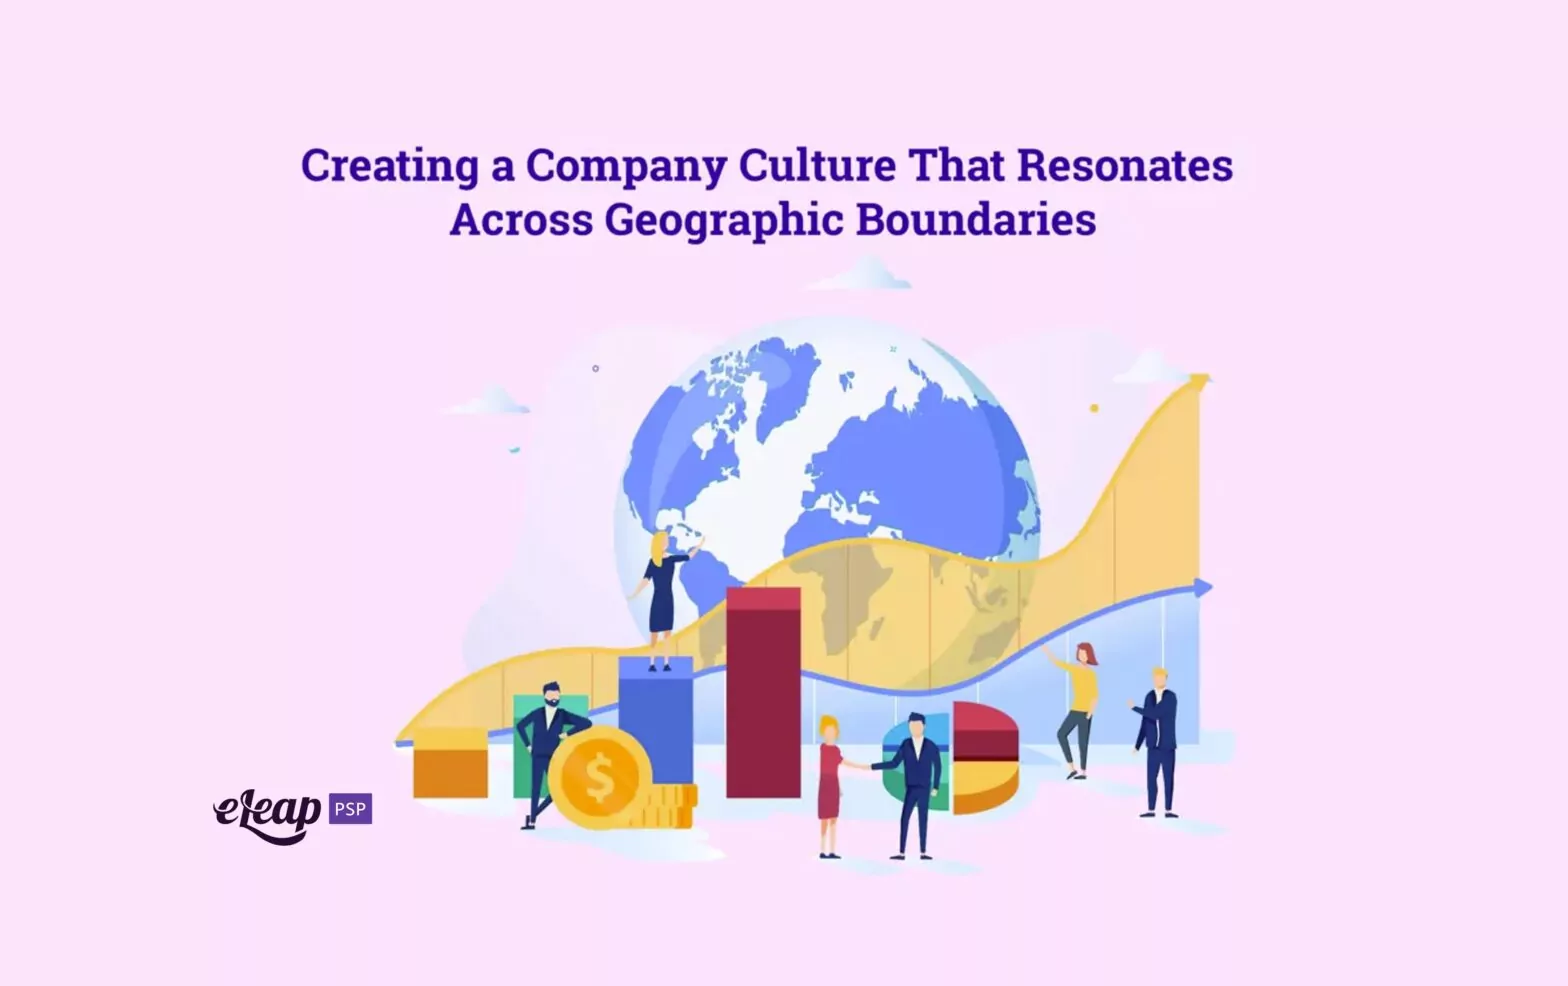 Creating a Company Culture That Resonates Across Geographic Boundaries